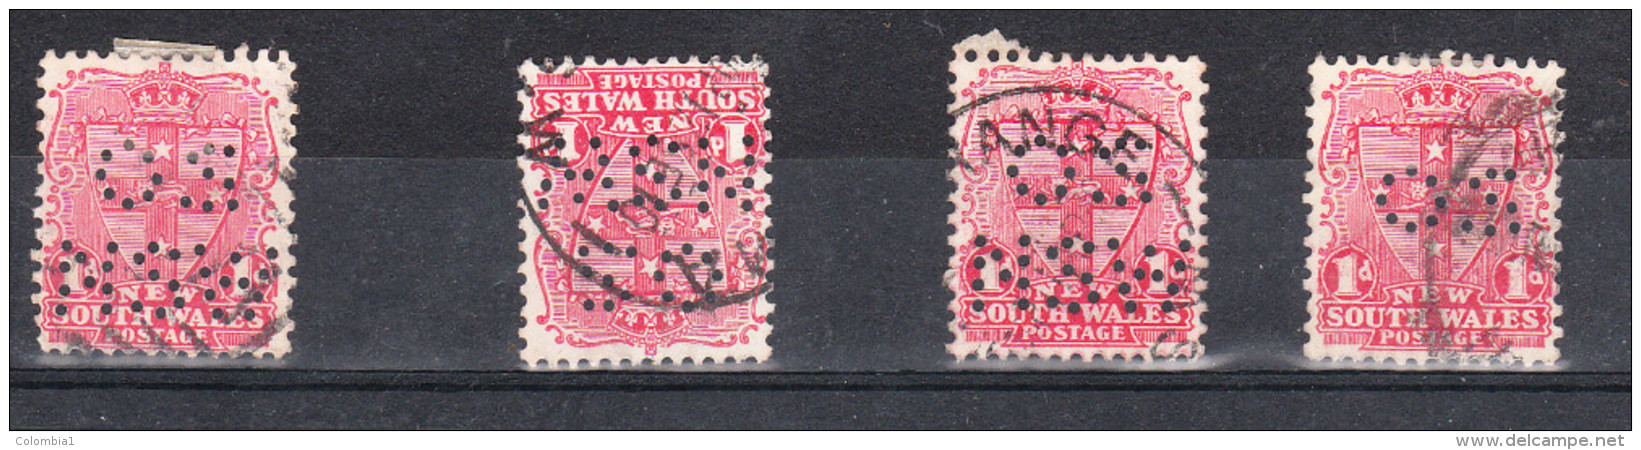 LOT De 4 TIMBRES PERFORES - Used Stamps